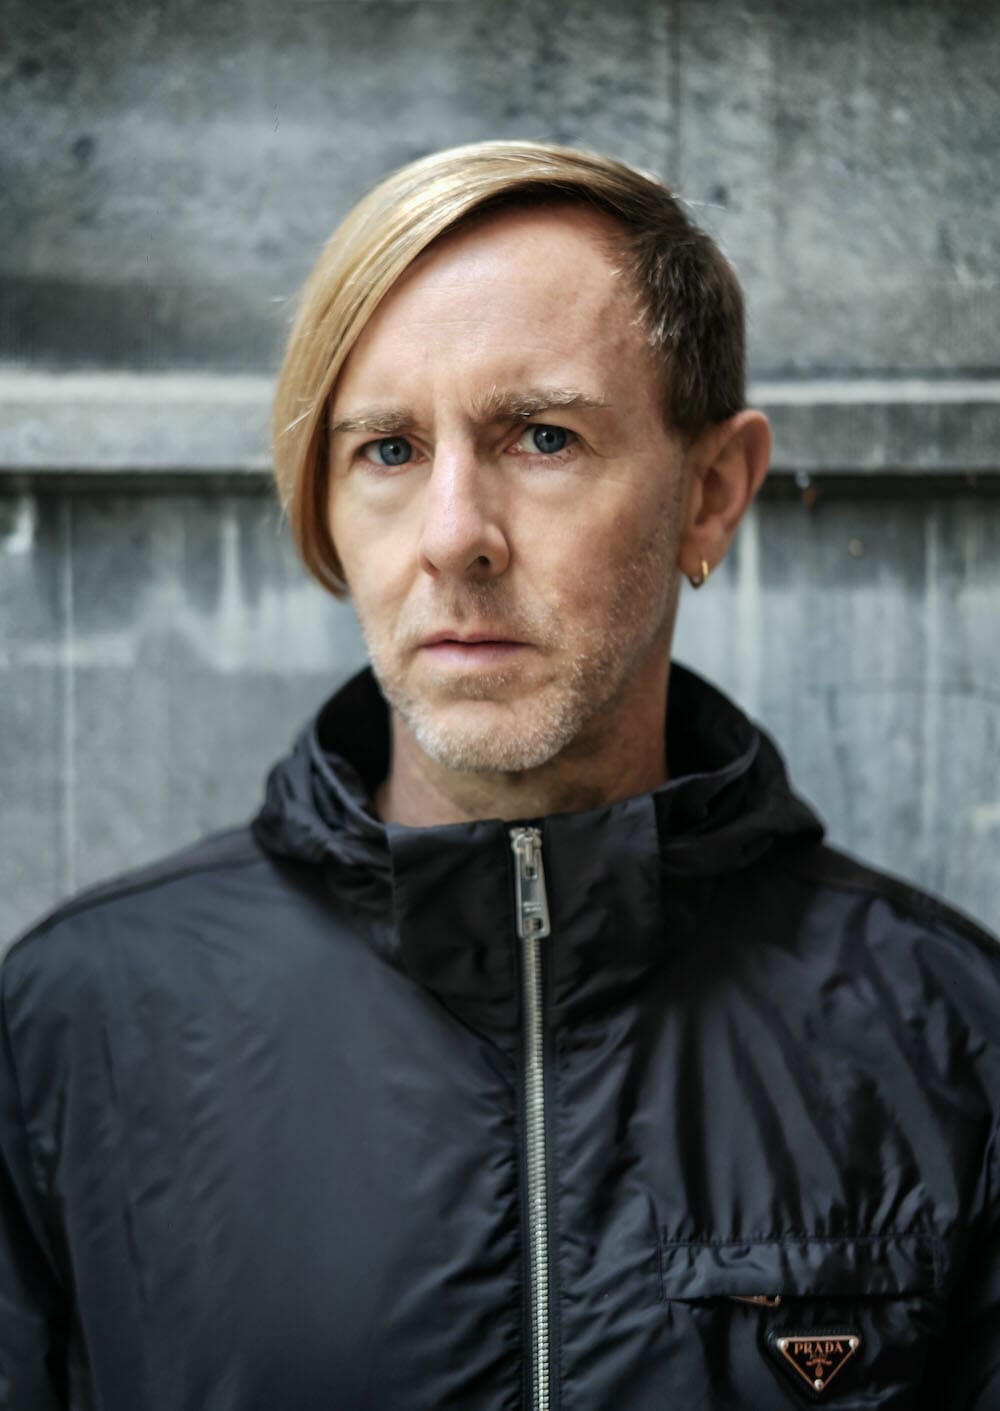 prada extends bangkok created and curated by richie hawtin